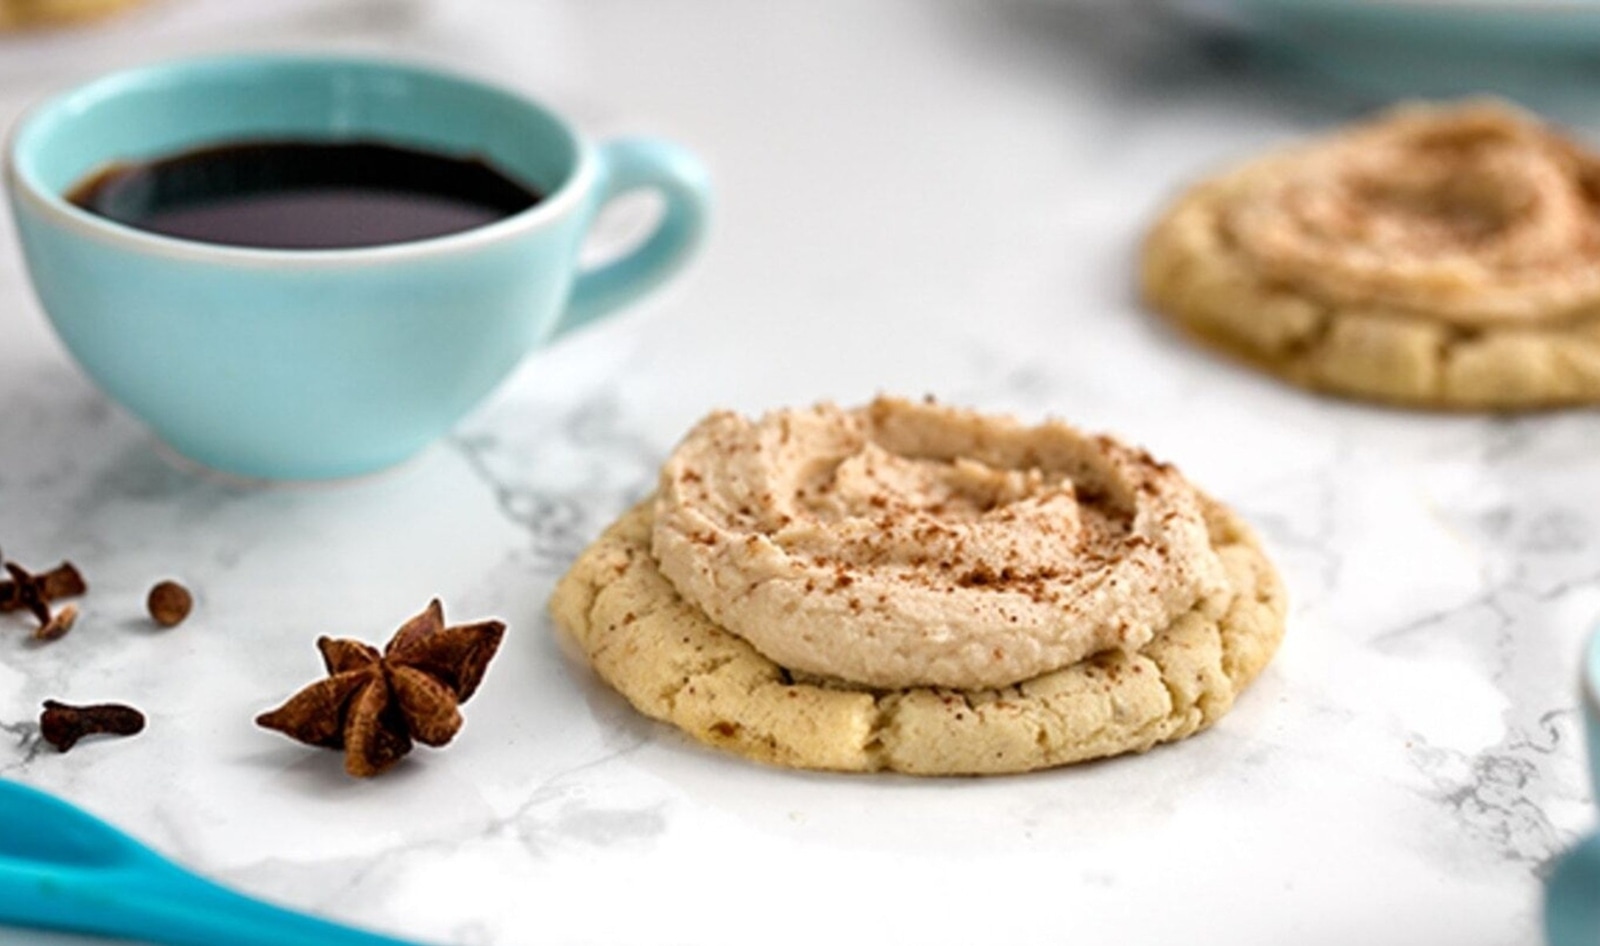 Stop Everything and Eat These 13 Vegan Christmas Cookies Immediately